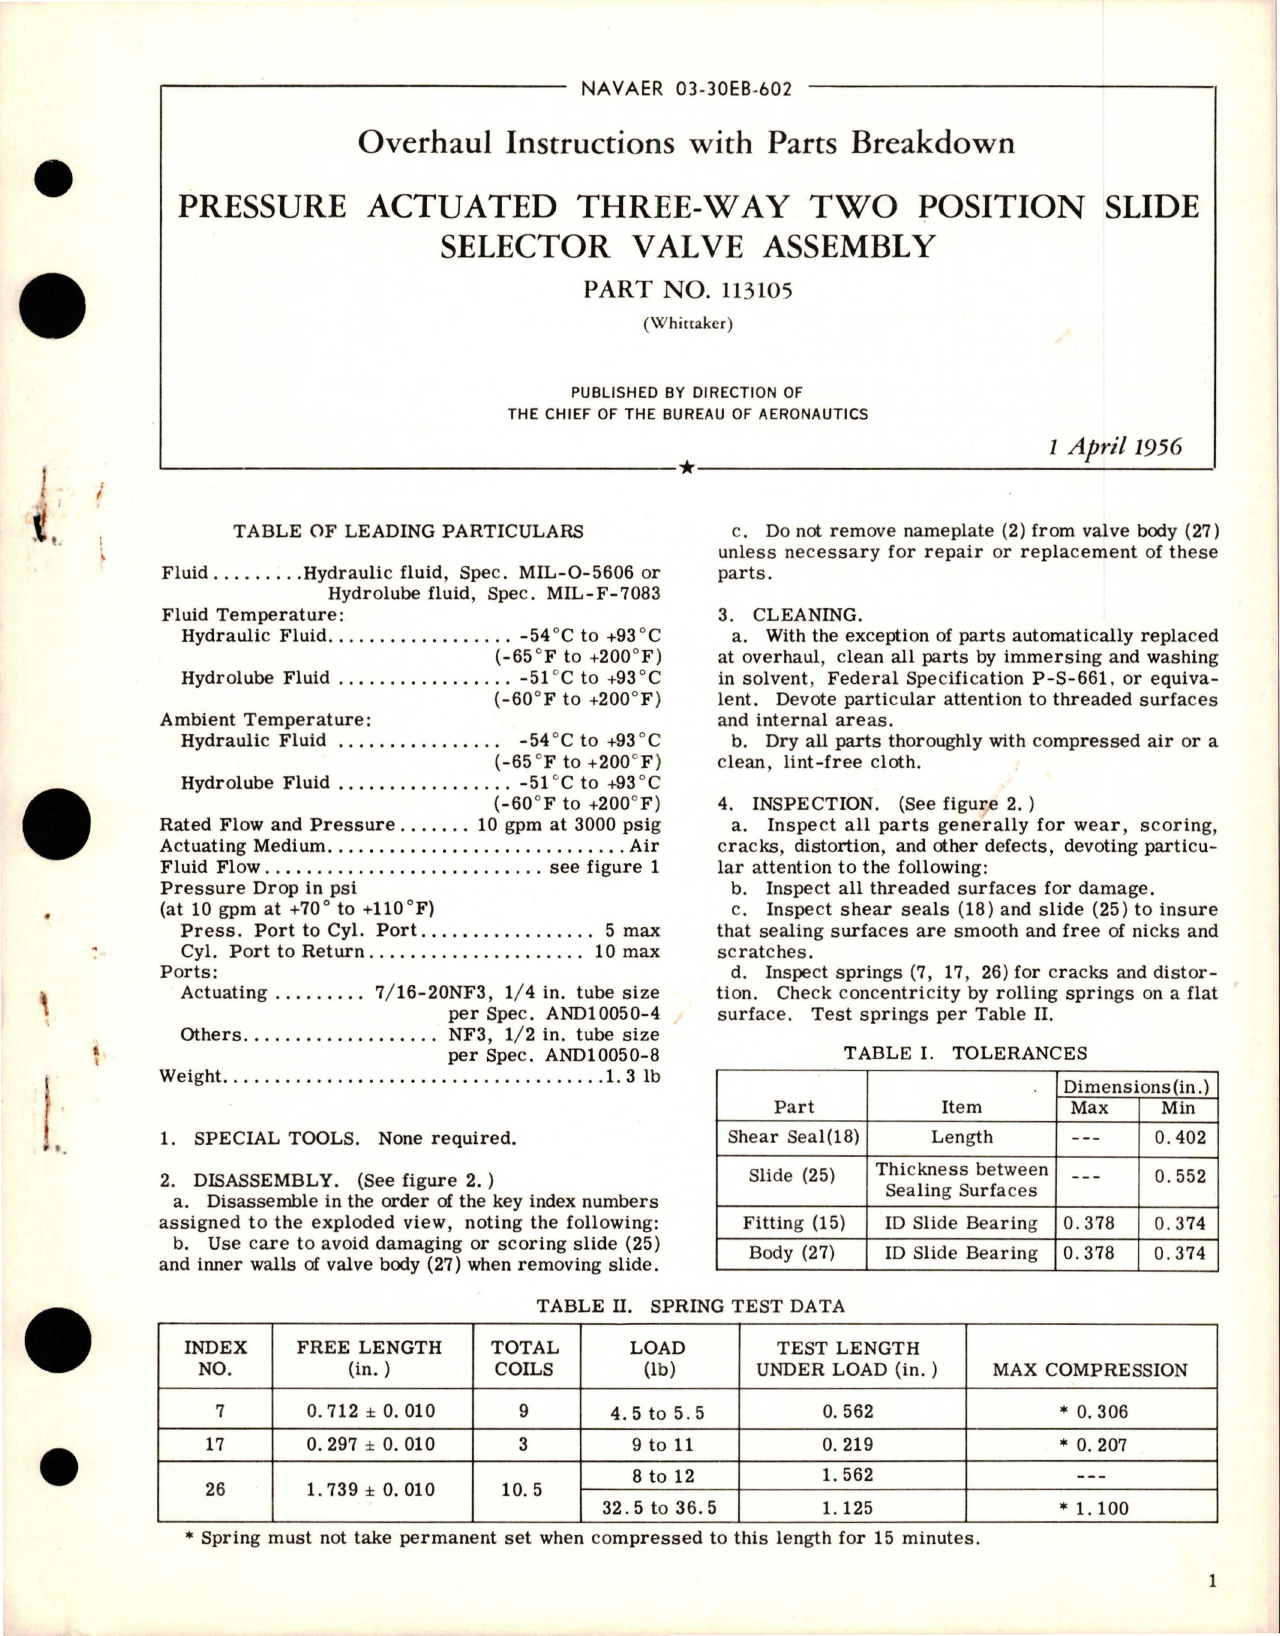 Sample page 1 from AirCorps Library document: Overhaul Instructions with Parts for Pressure Actuated Three Way Two Position Slide Selector Valve Assembly - Part 113105